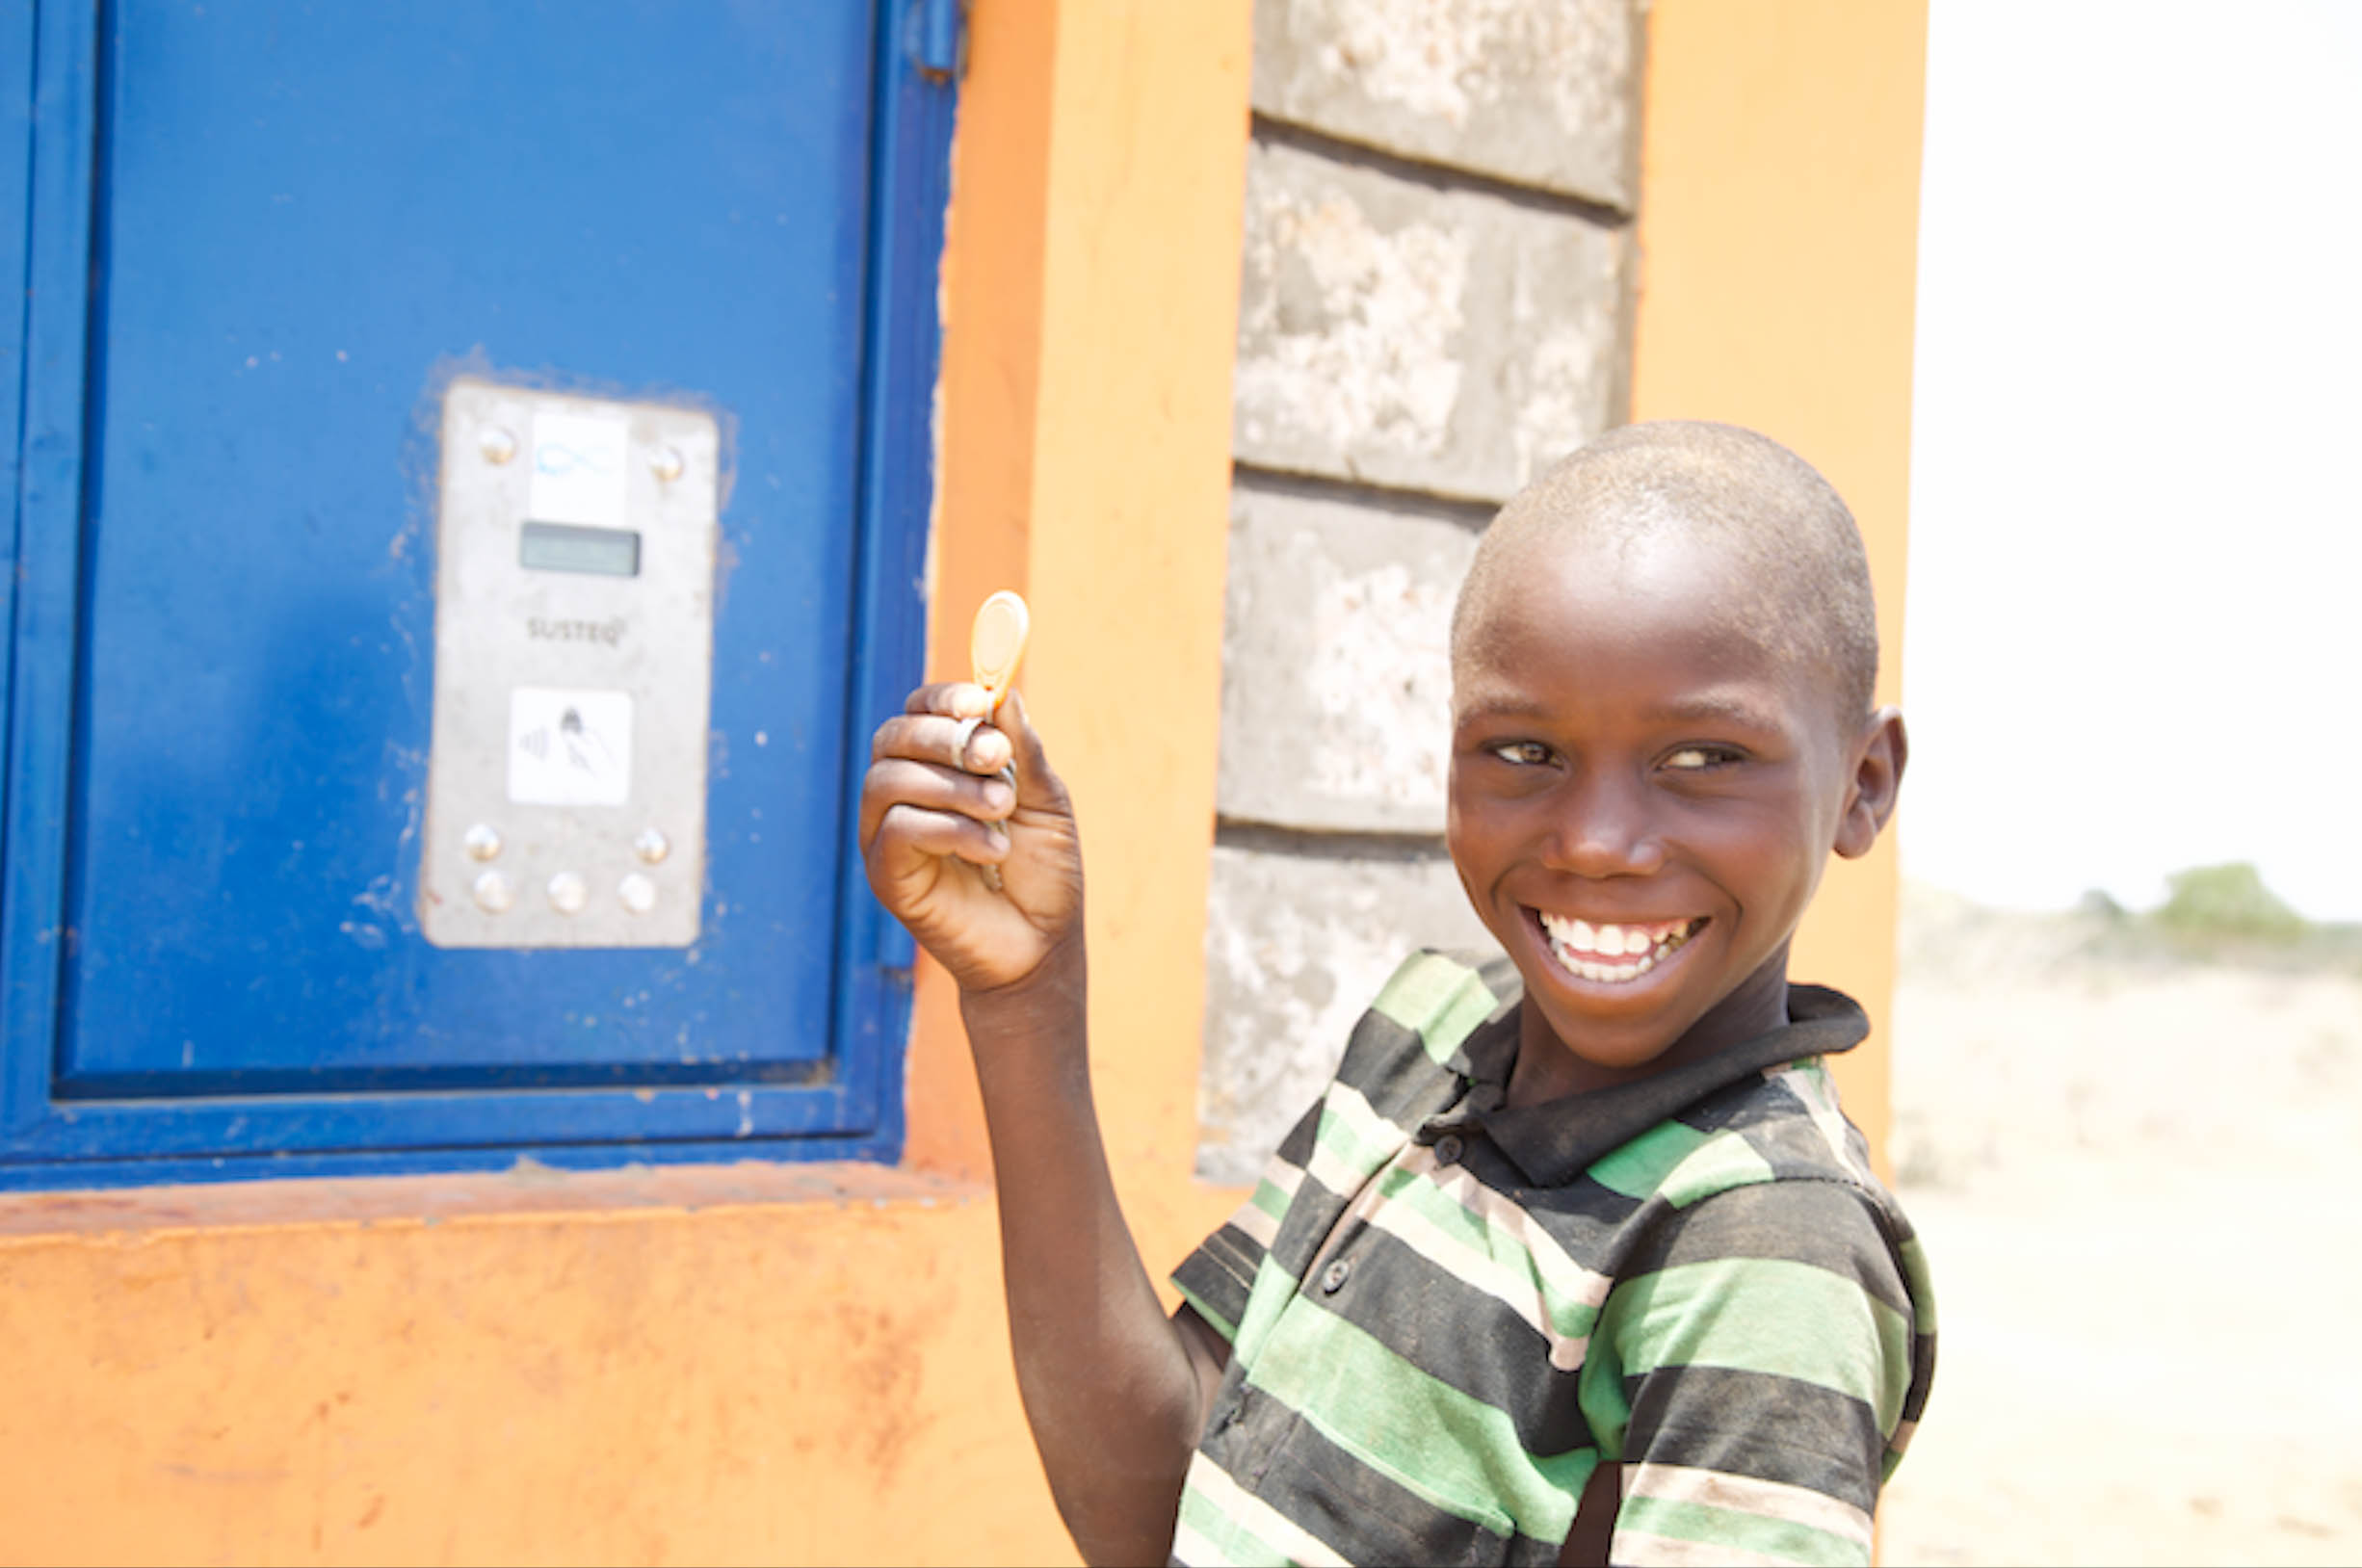 Heri displays a chip that he uses to access water for domestic use and for animals